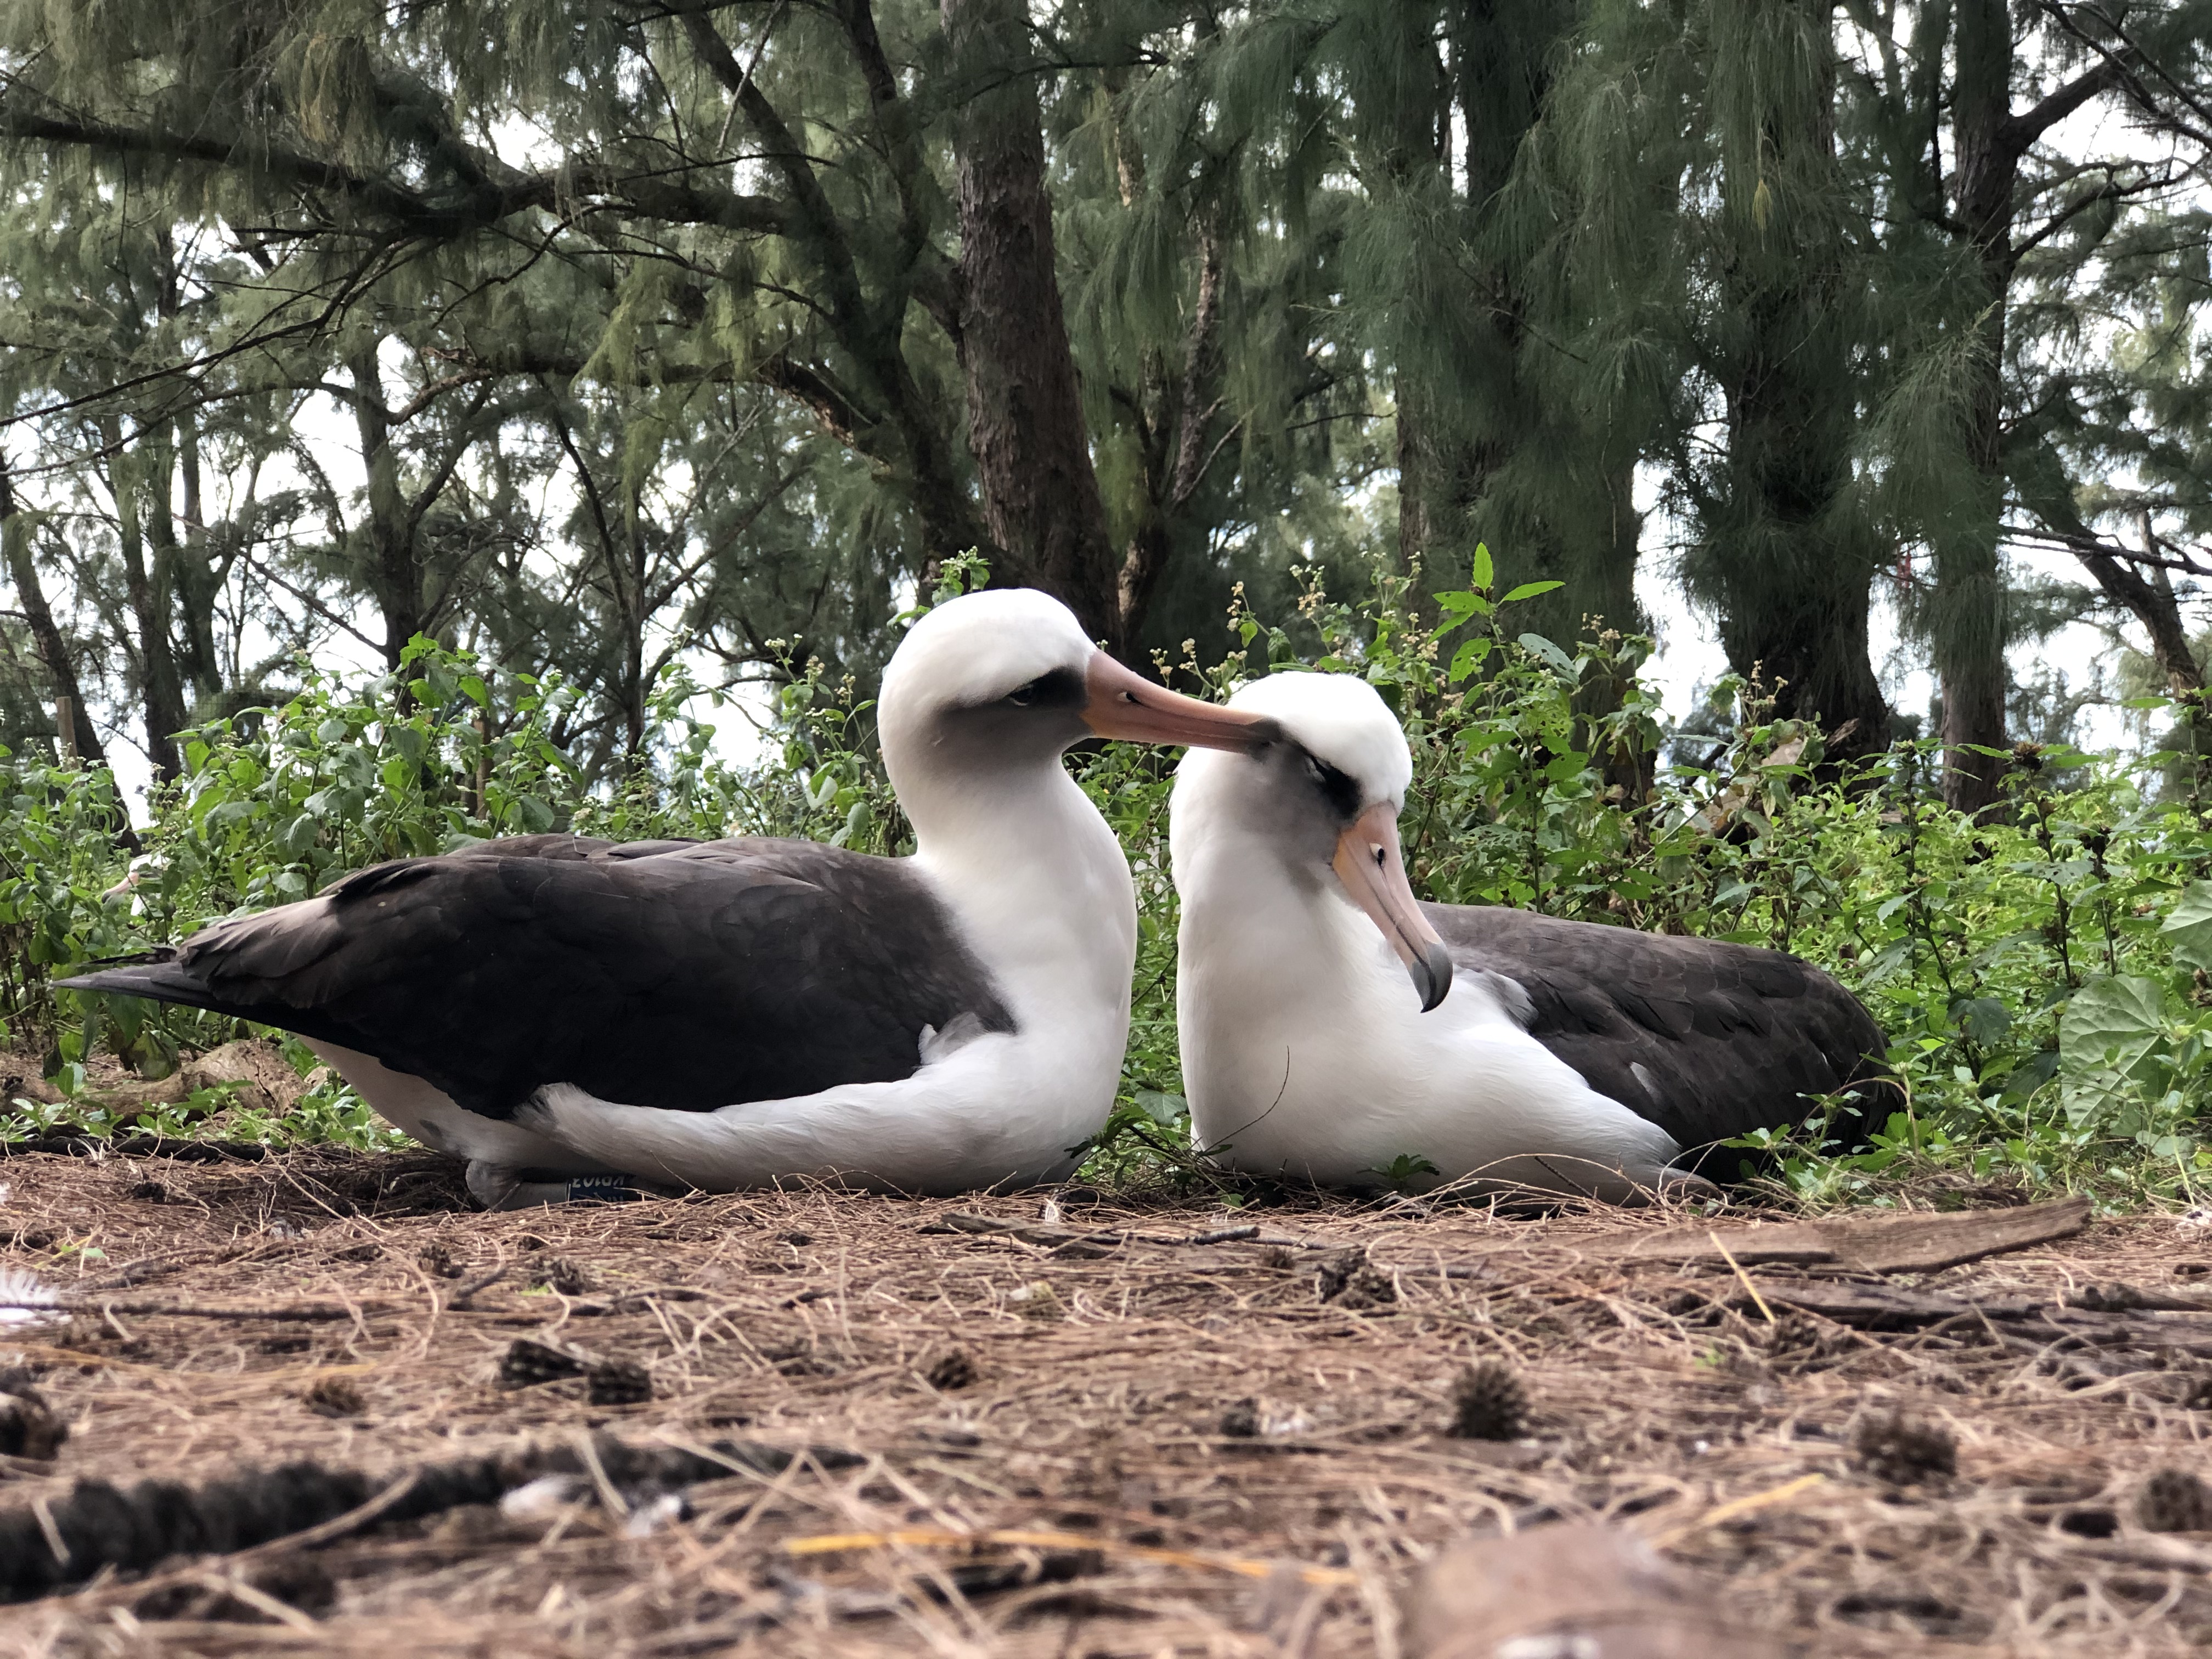 Two adult Laysan albatross nuzzled together affectionately on their nest